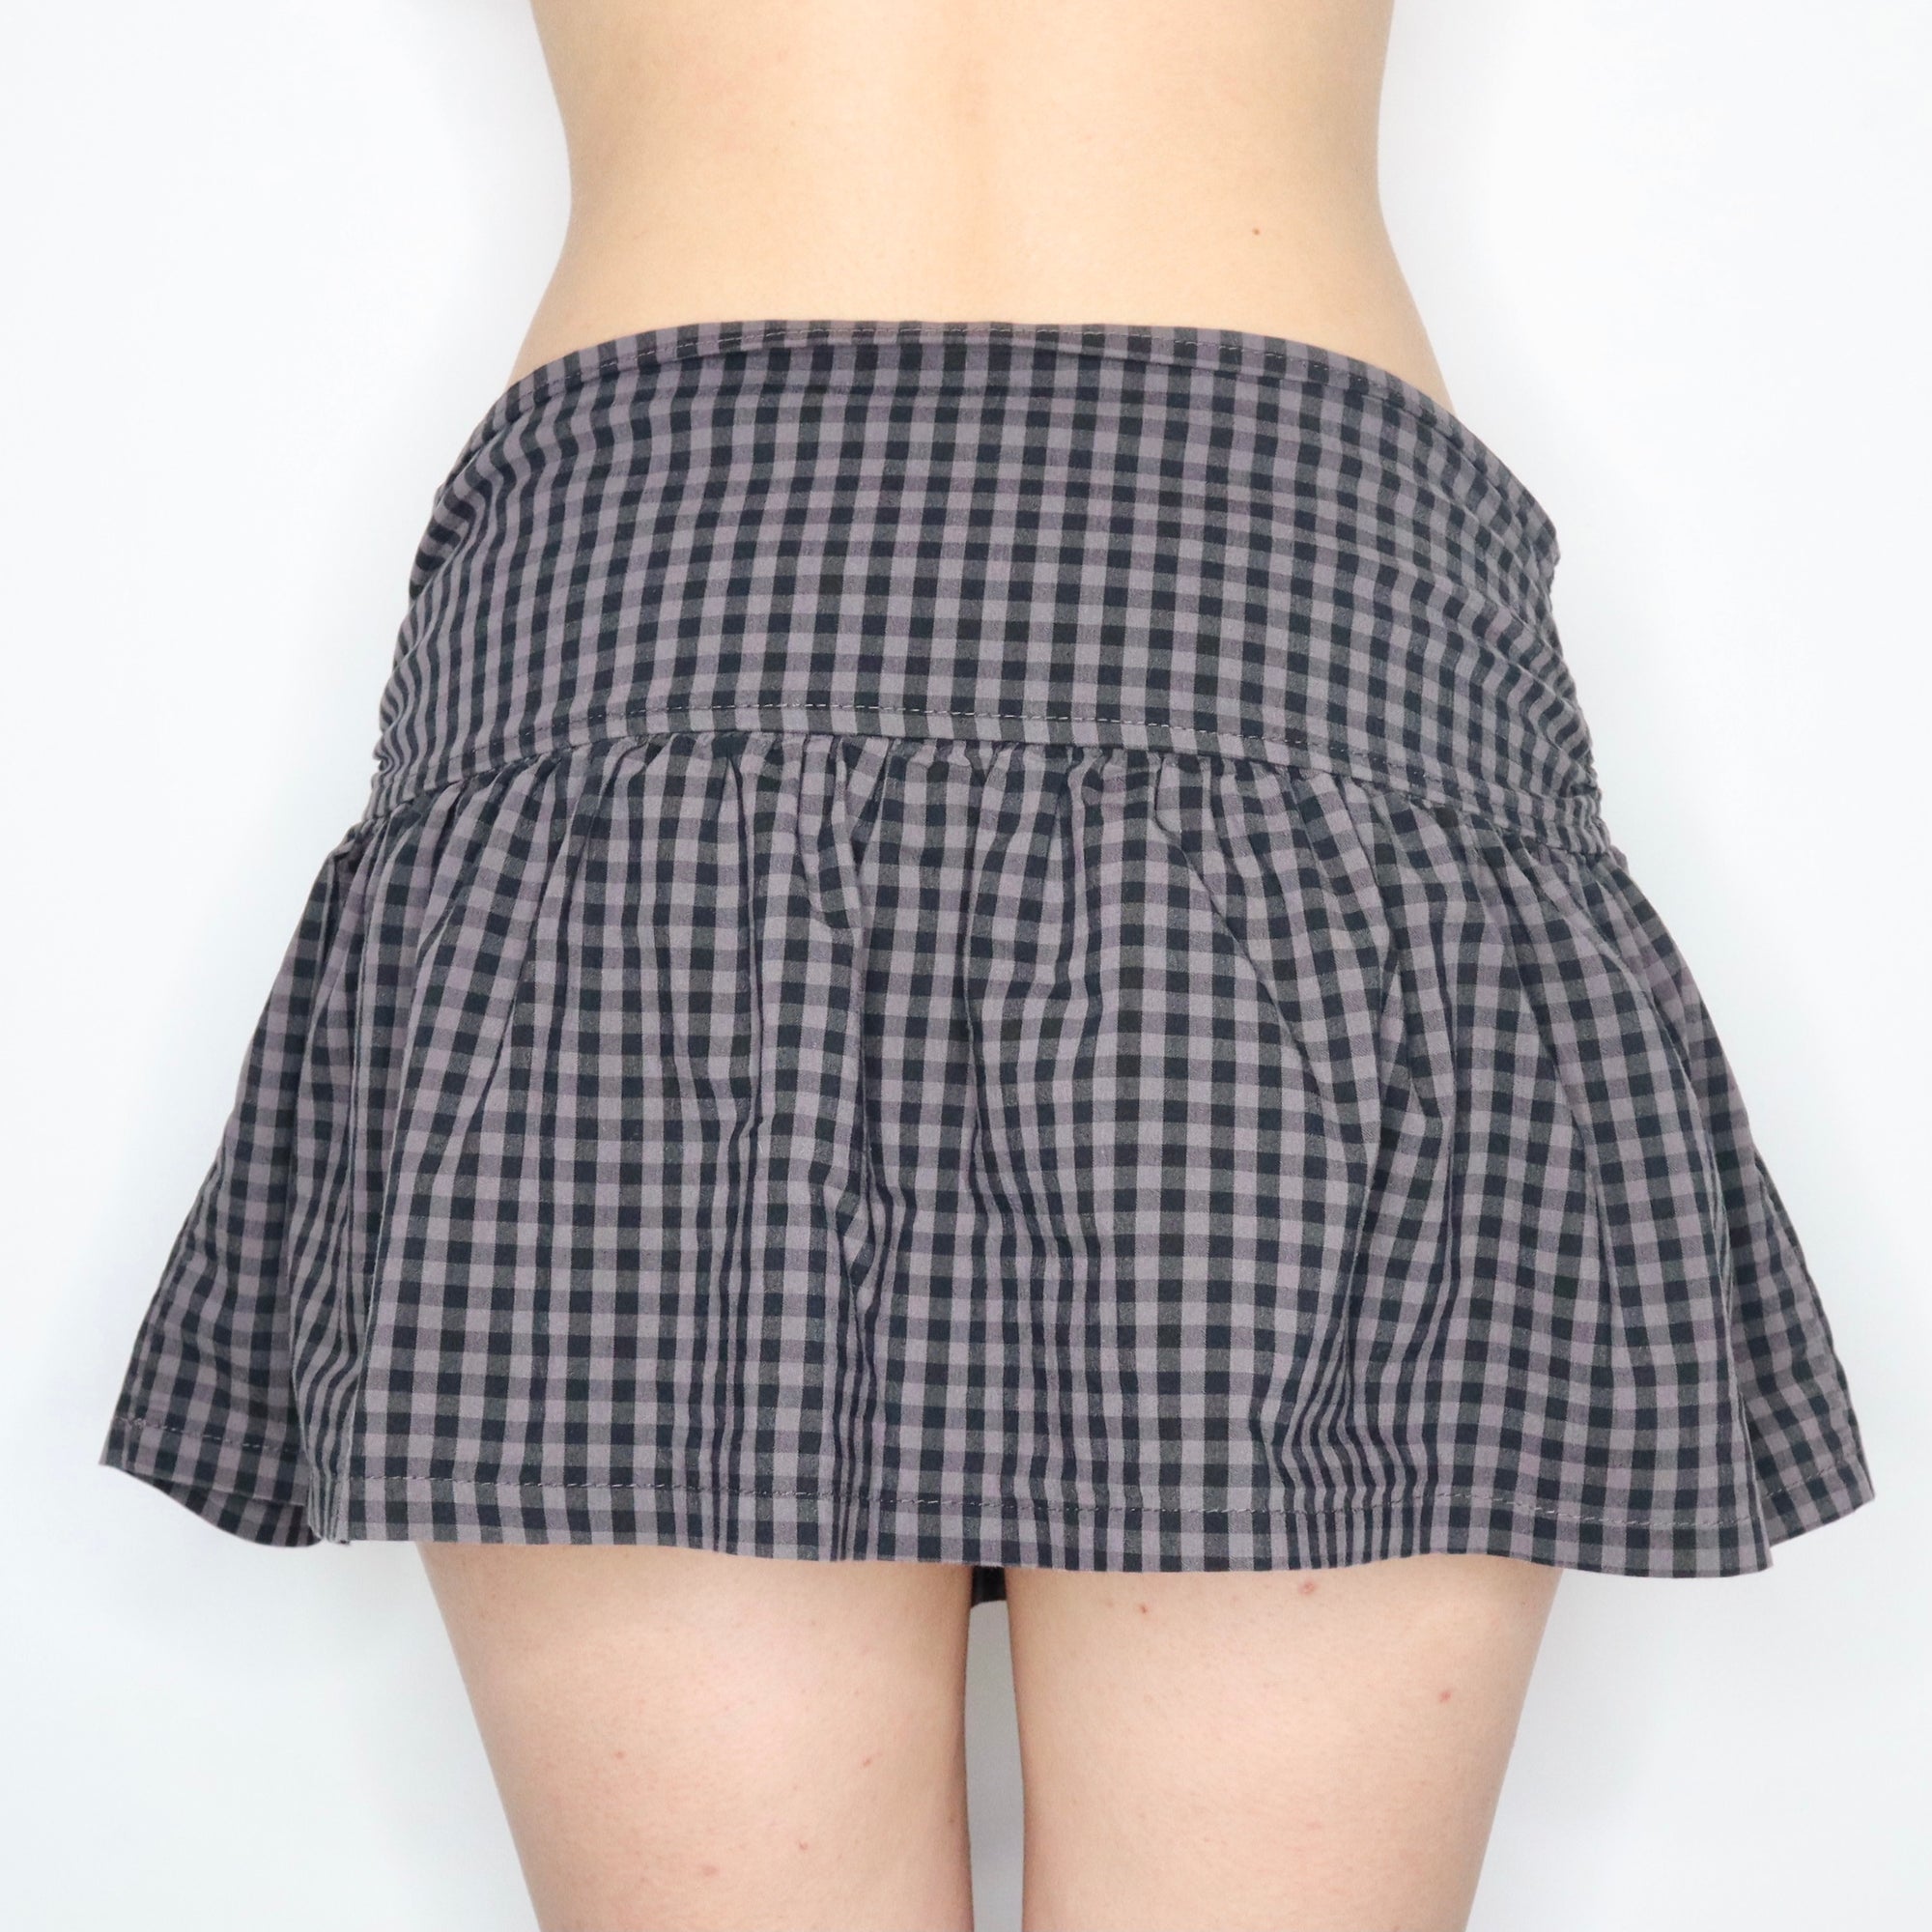 Vintage Early 2000s Black and Grey Checkered Mini Skirt